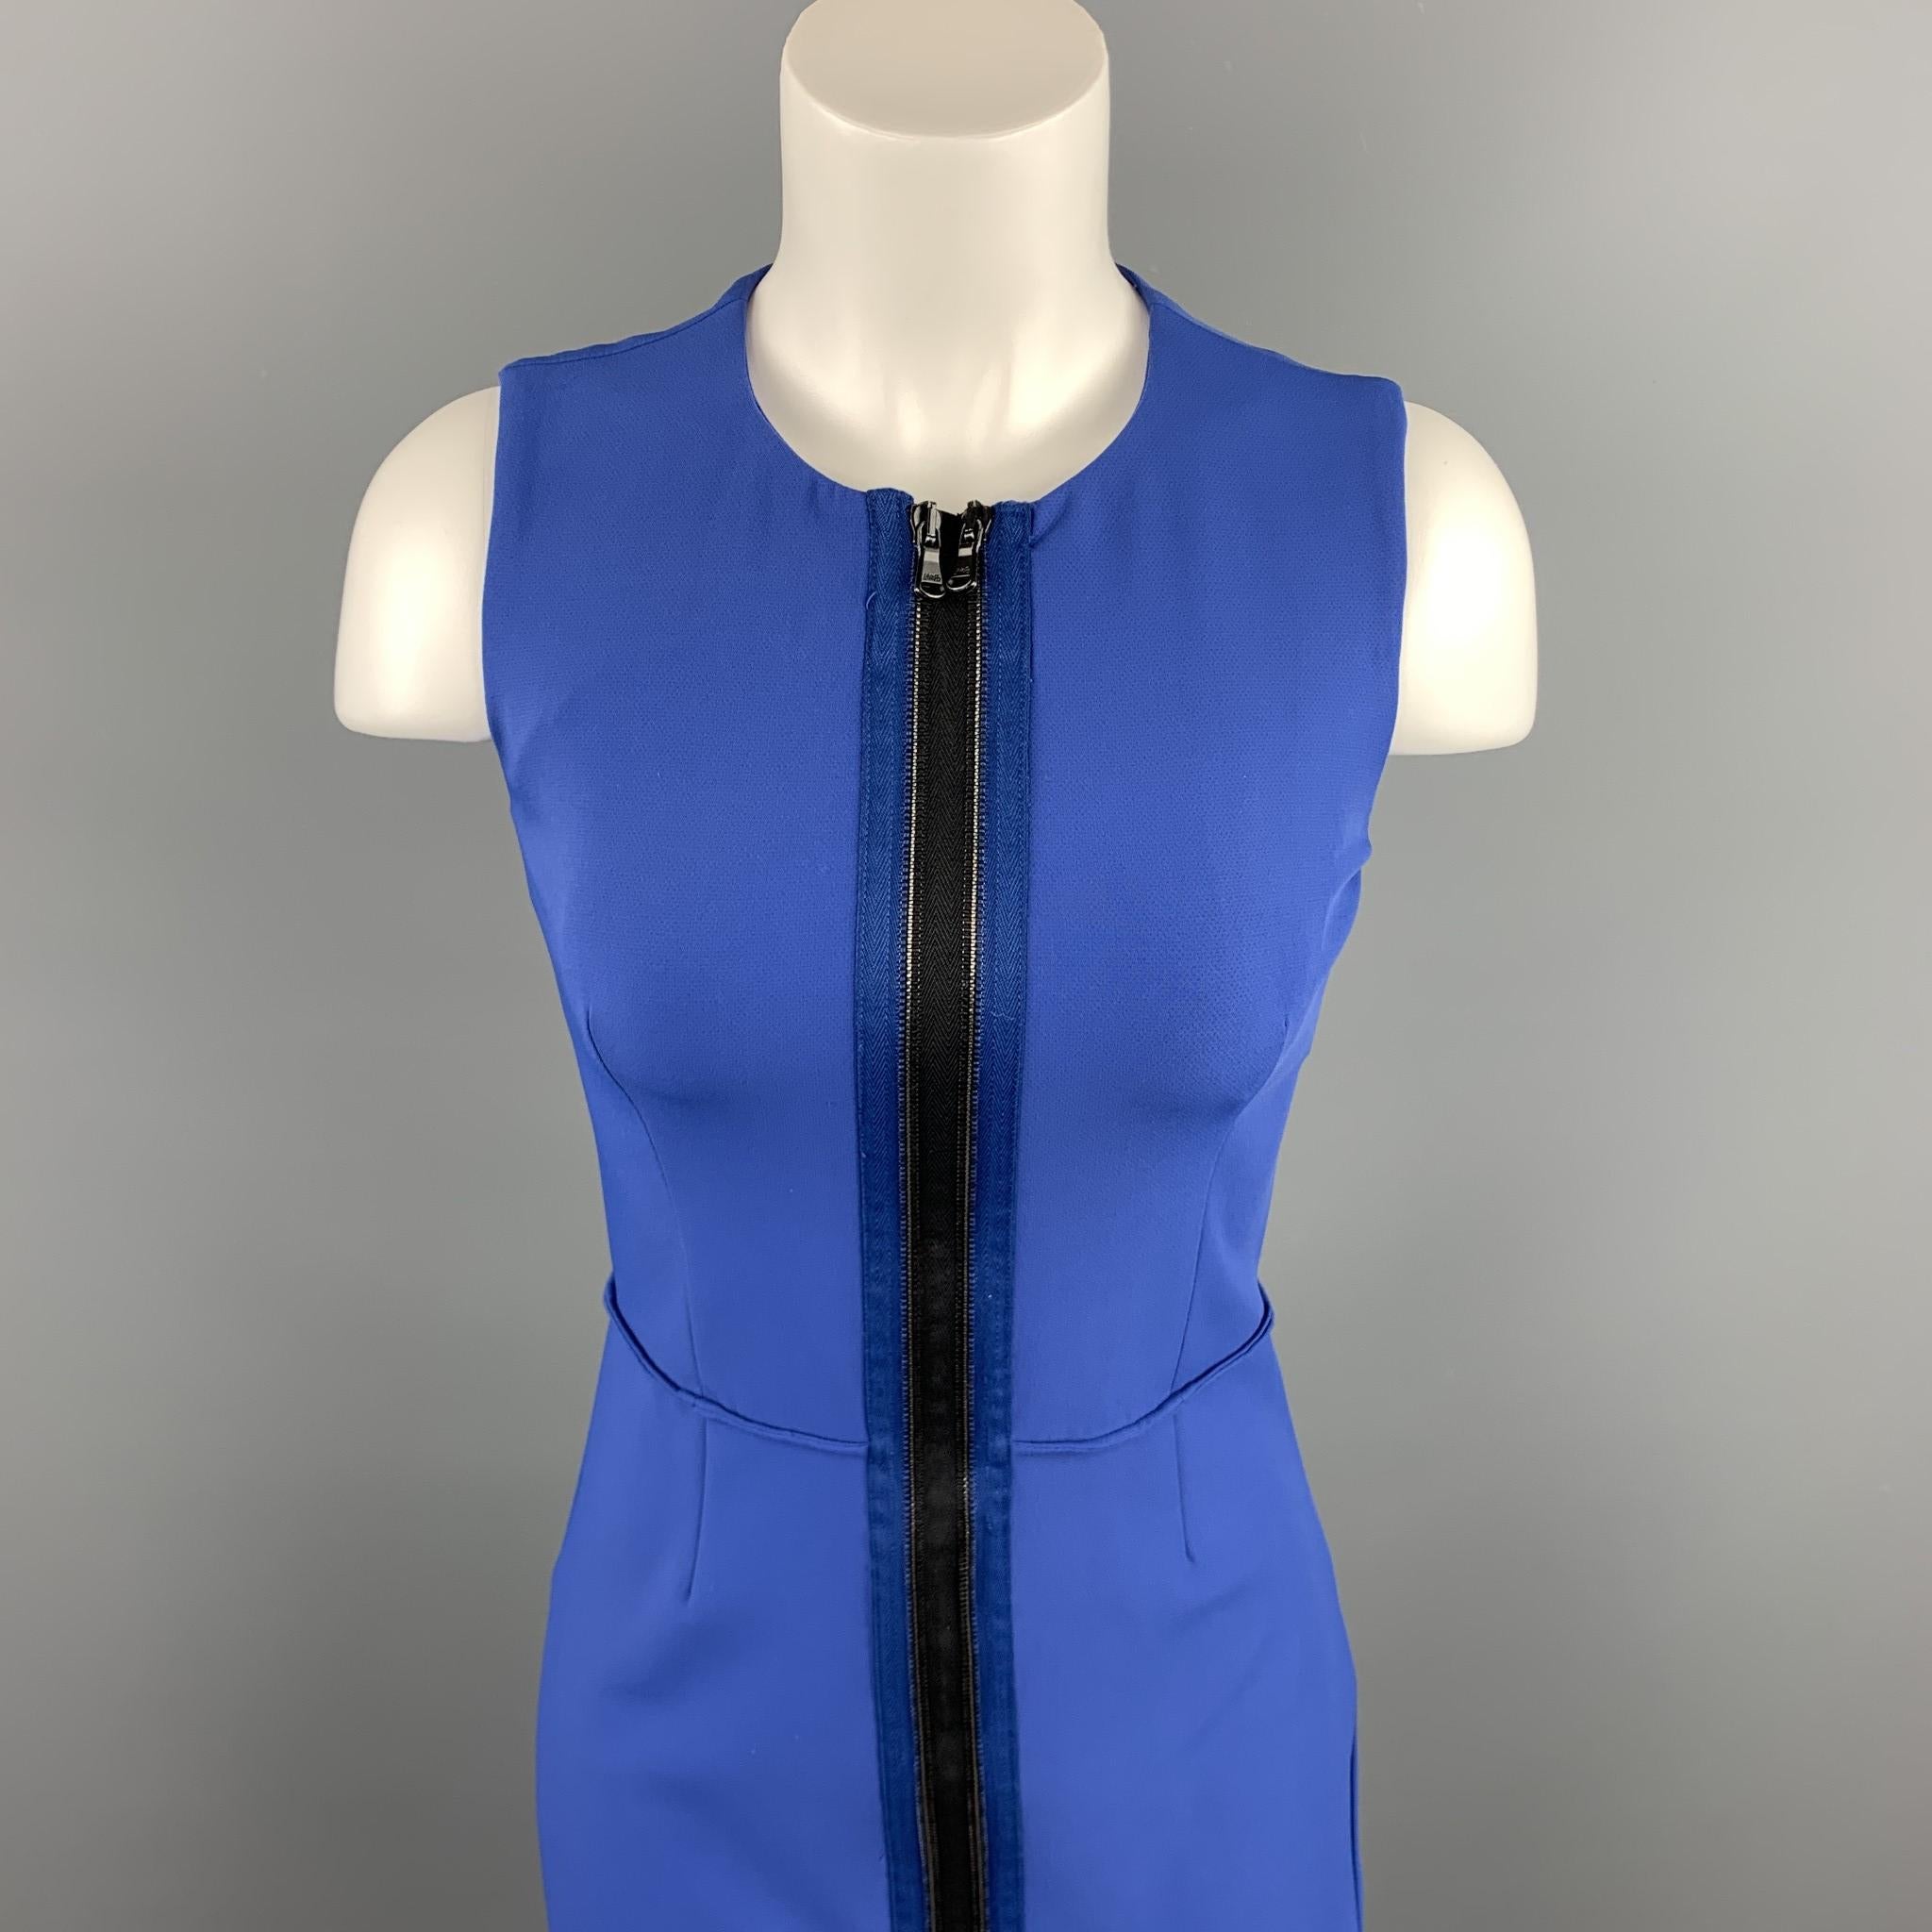 OPENING CEREMONY dress comes in a blue stretch polyester blend featuring a sheath style and a front double zipper detail closure. Made in USA.

Excellent Pre-Owned Condition.
Marked: 4

Measurements:

Shoulder: 12.5 in. 
Bust: 30 in. 
Waist: 26 in.